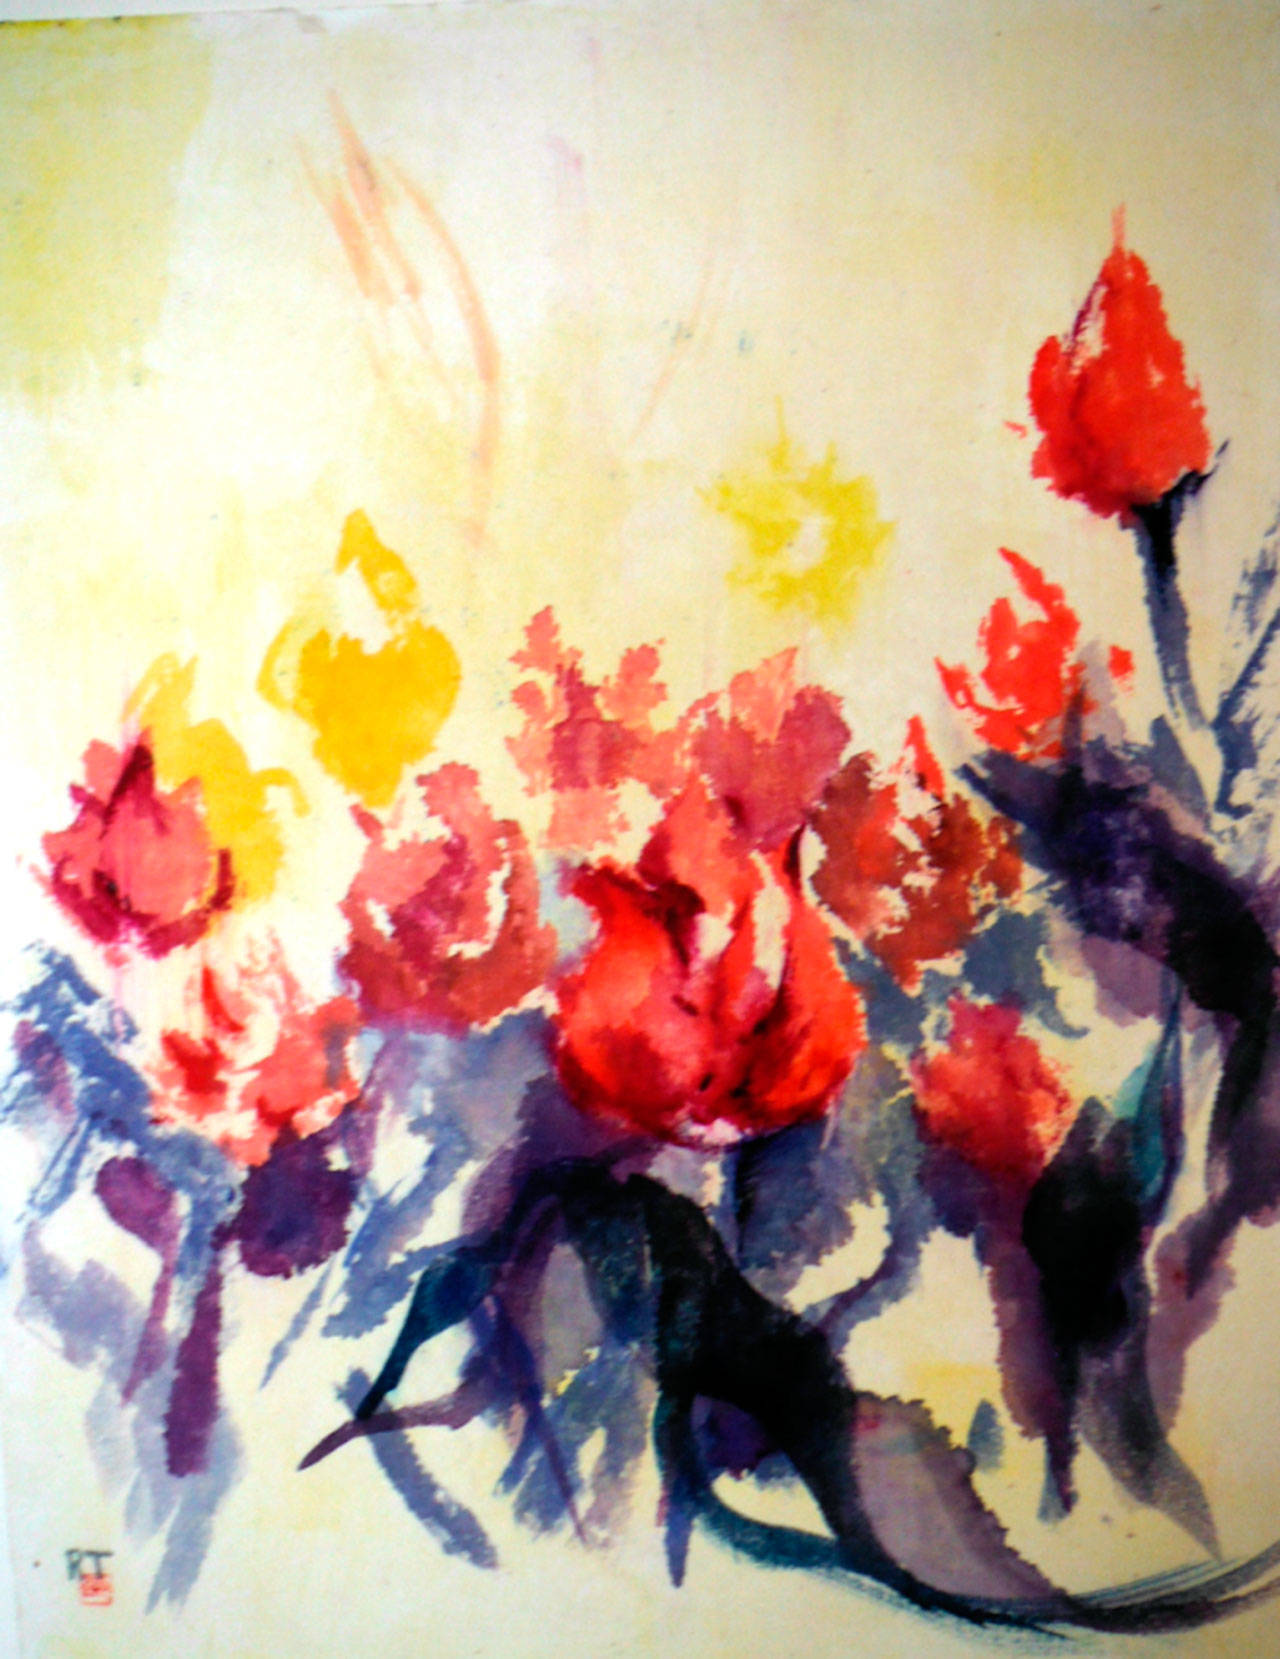 Ryoko Toyama’s “March Bloom” will be on display at Blue Whole Gallery during First Friday Art Walk in Sequim tonight.